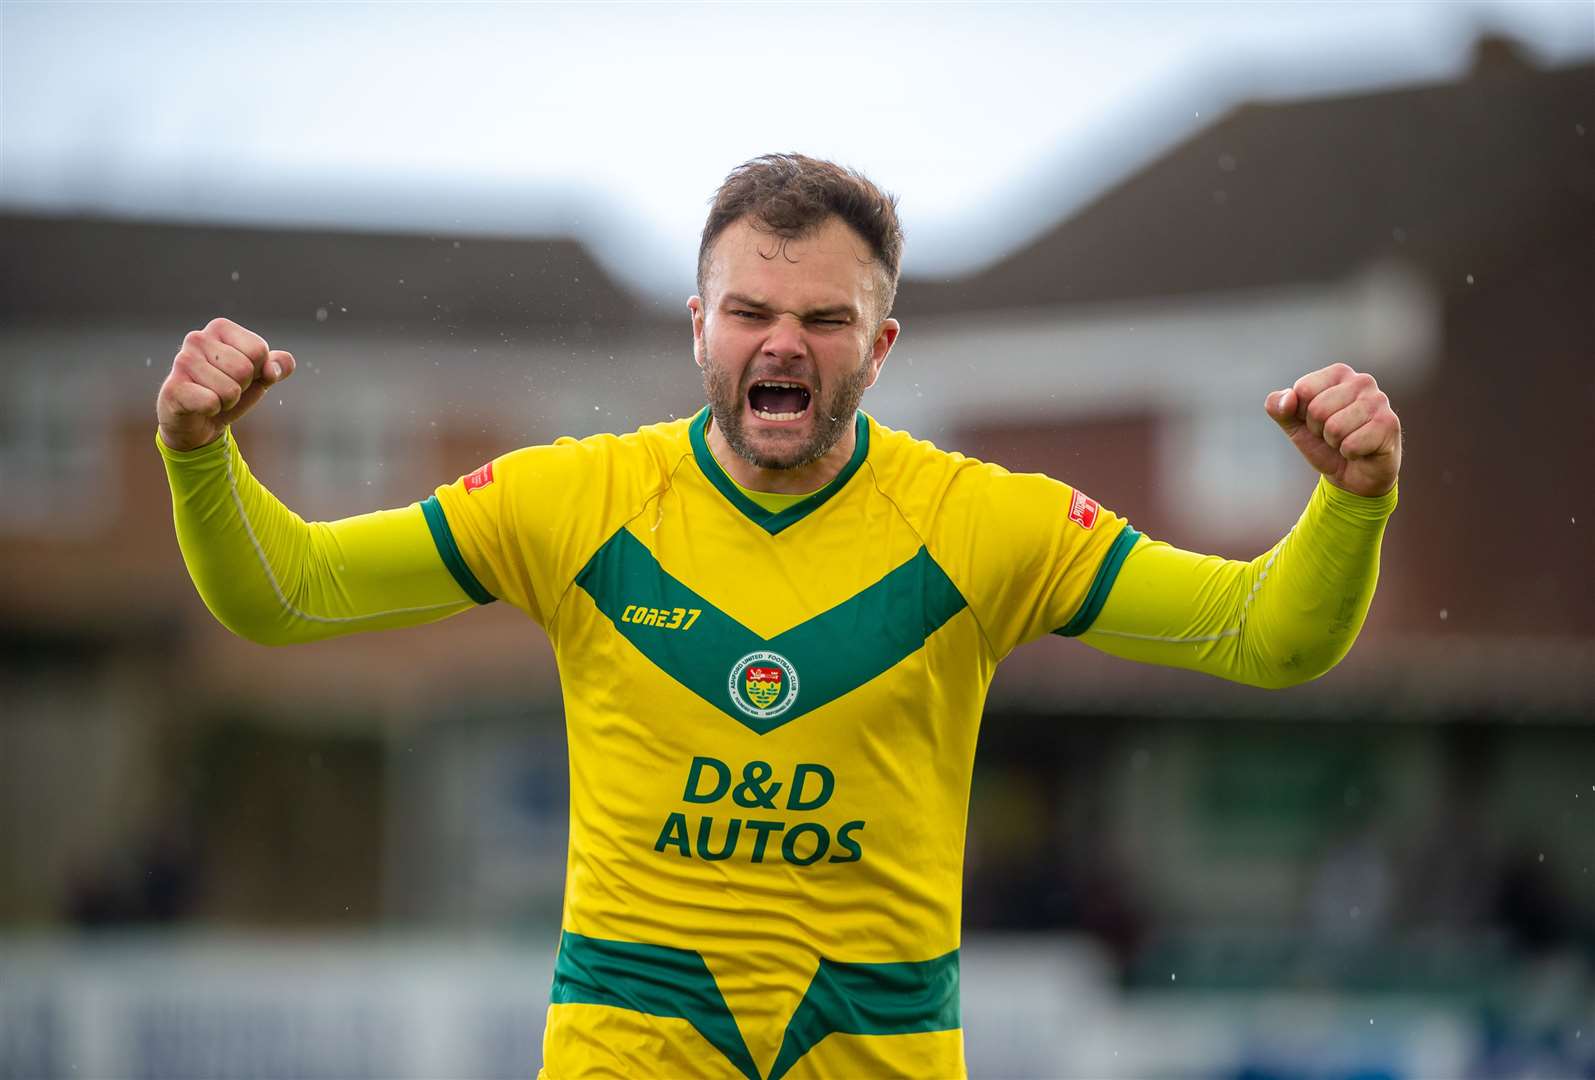 Looks what it means to Gary Lockyer after his clincher at VCD Picture: Ian Scammell